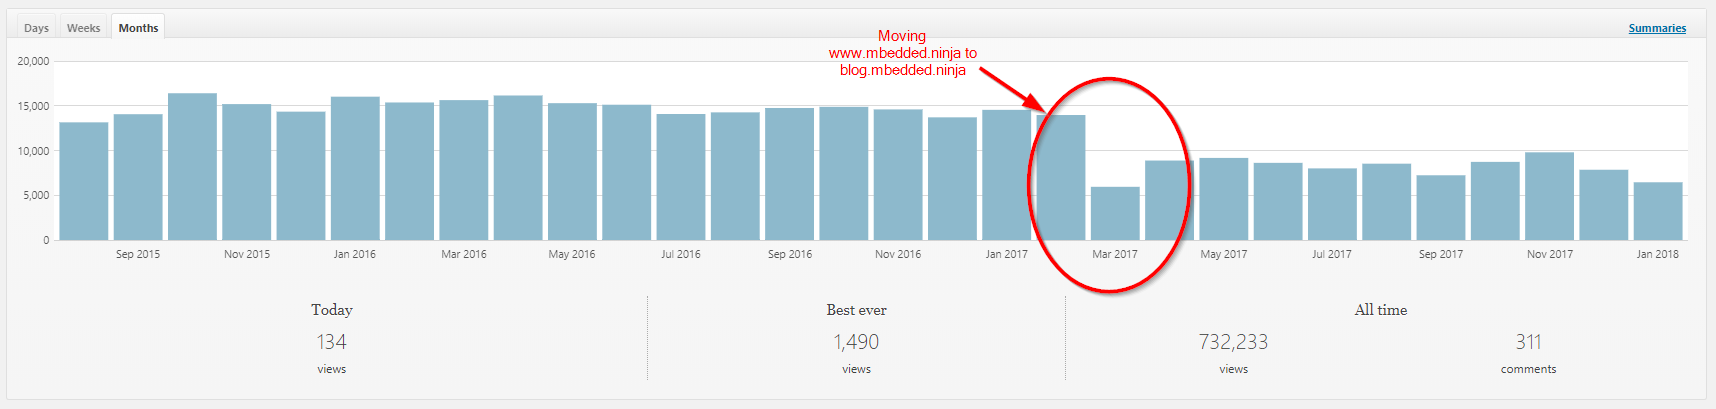 Visitor stats for mbedded.ninja in 2017, highlighting the drop in visits when the blog was moved from www.mbedded.ninja to blog.mbedded.ninja in March 2017.